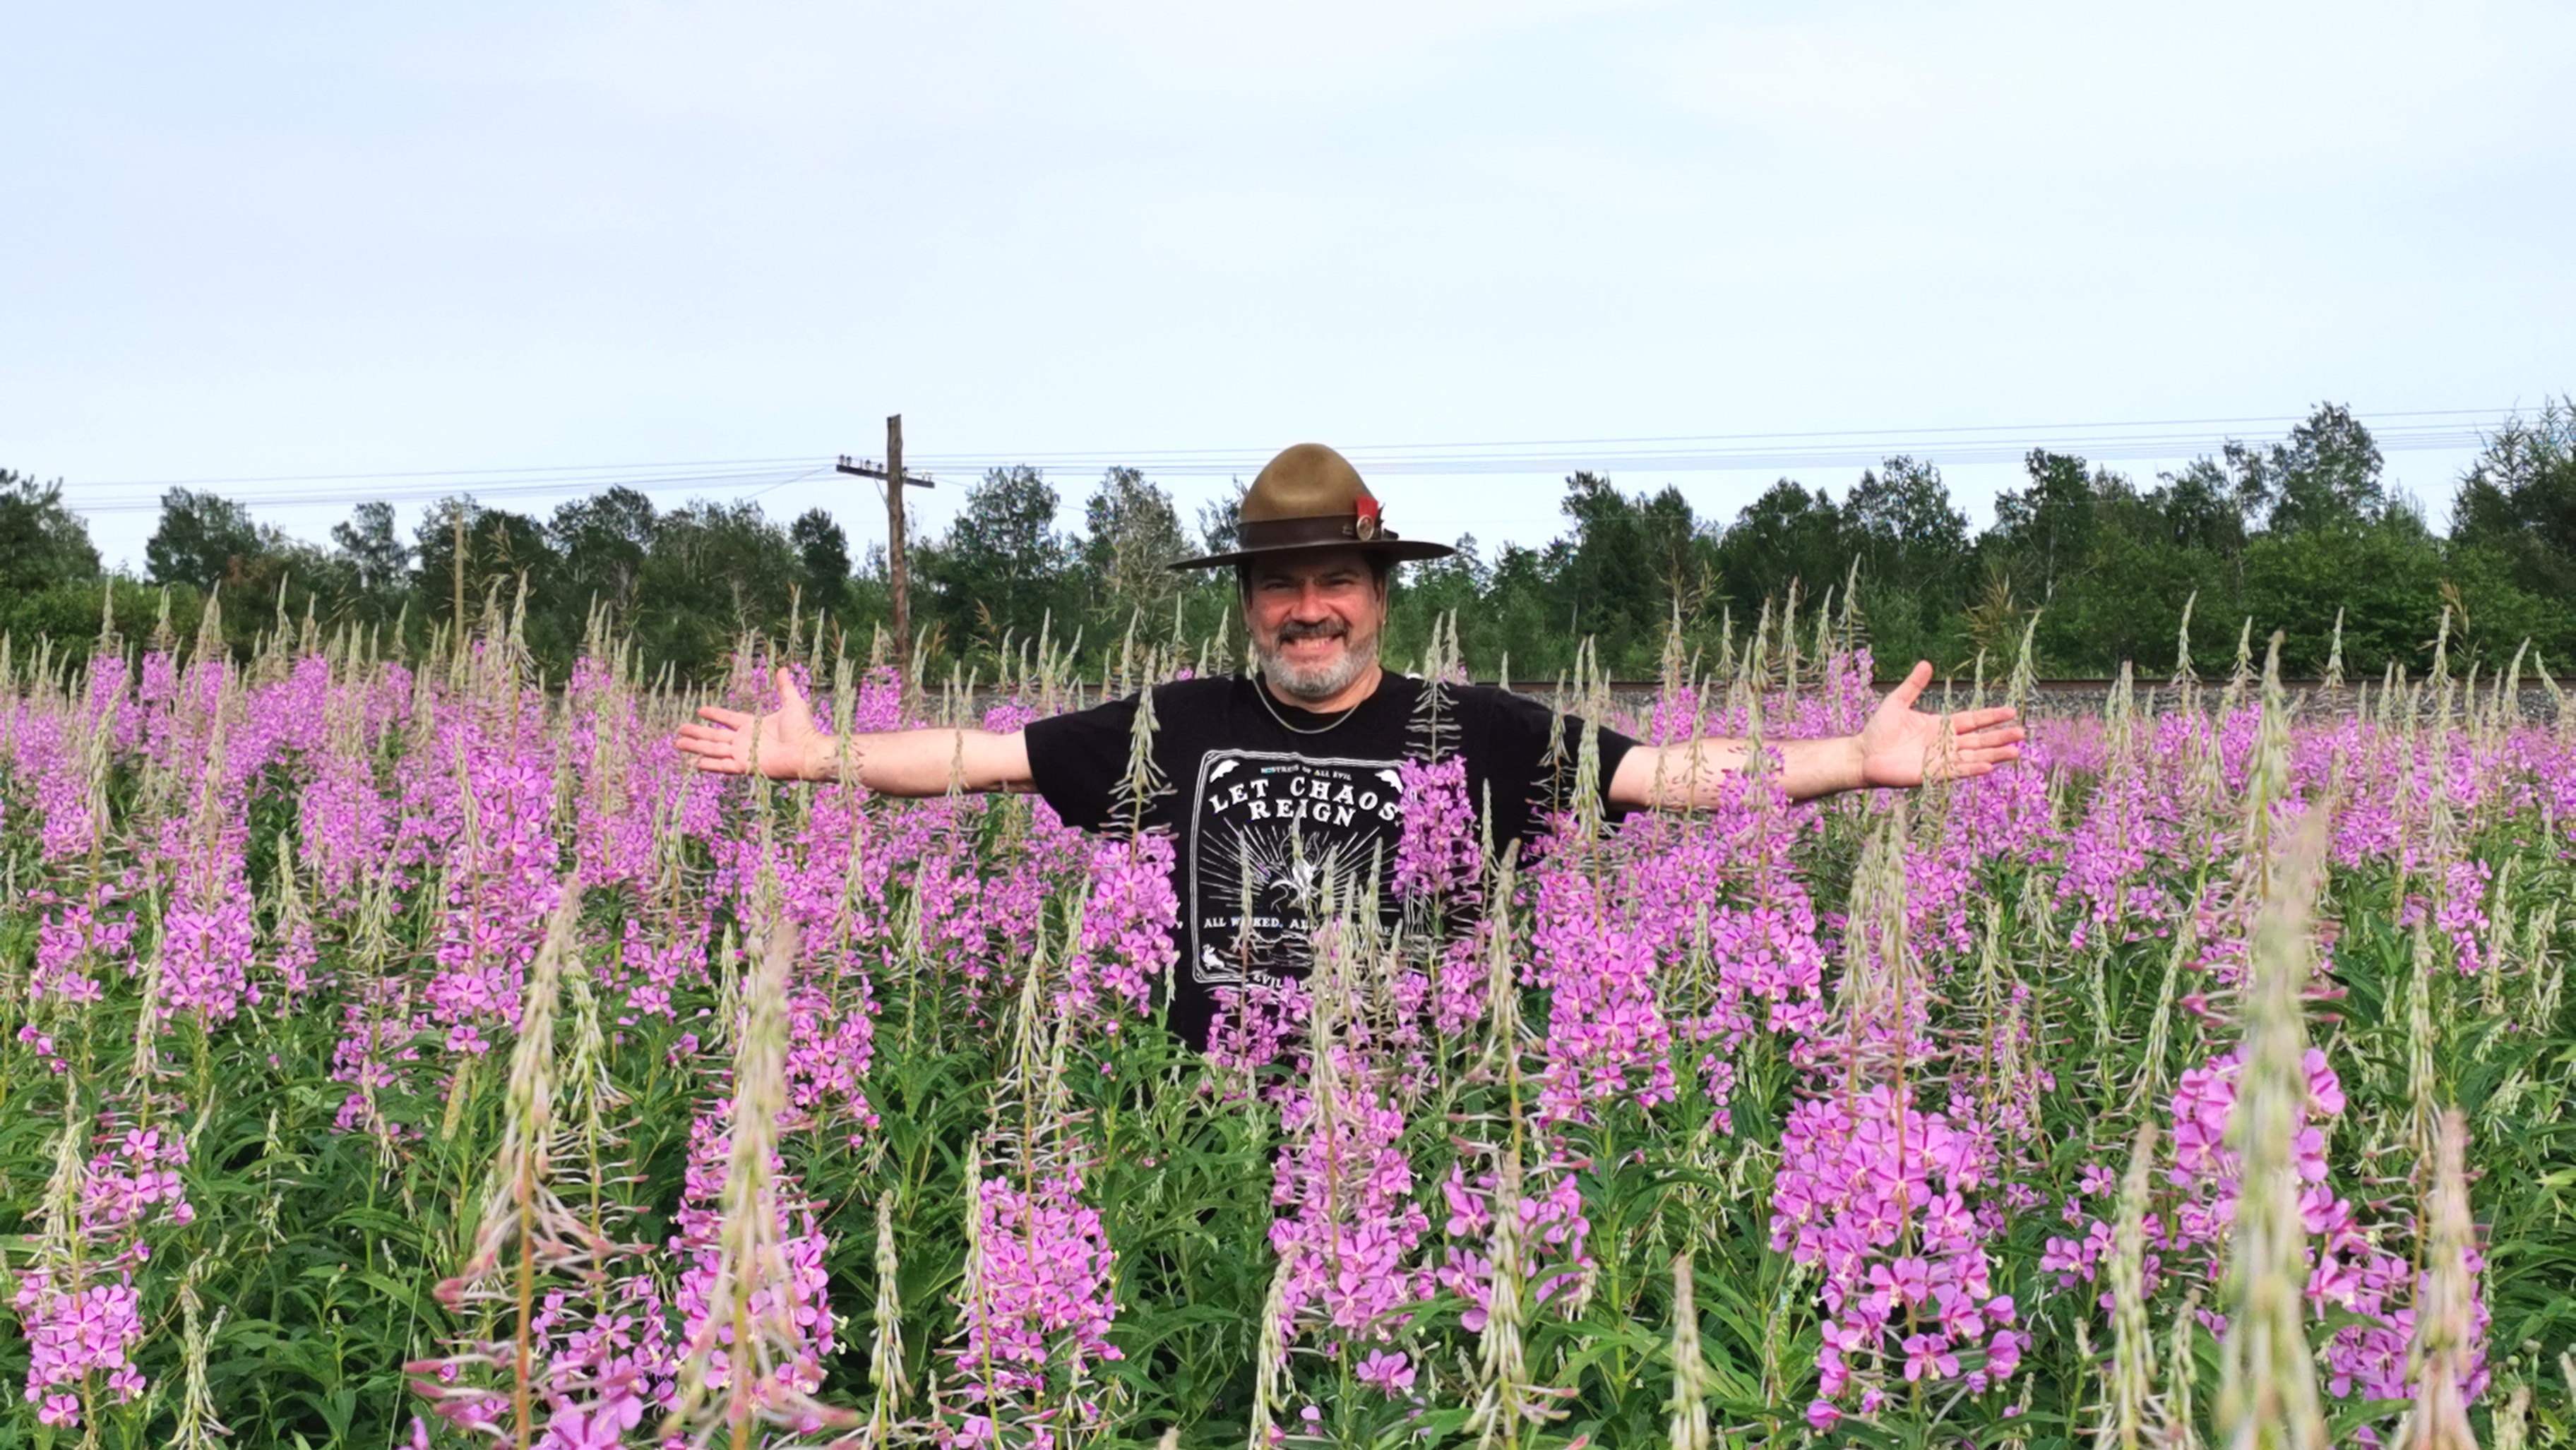 A man with a hat stands in a field of flowers with his arms stretched out